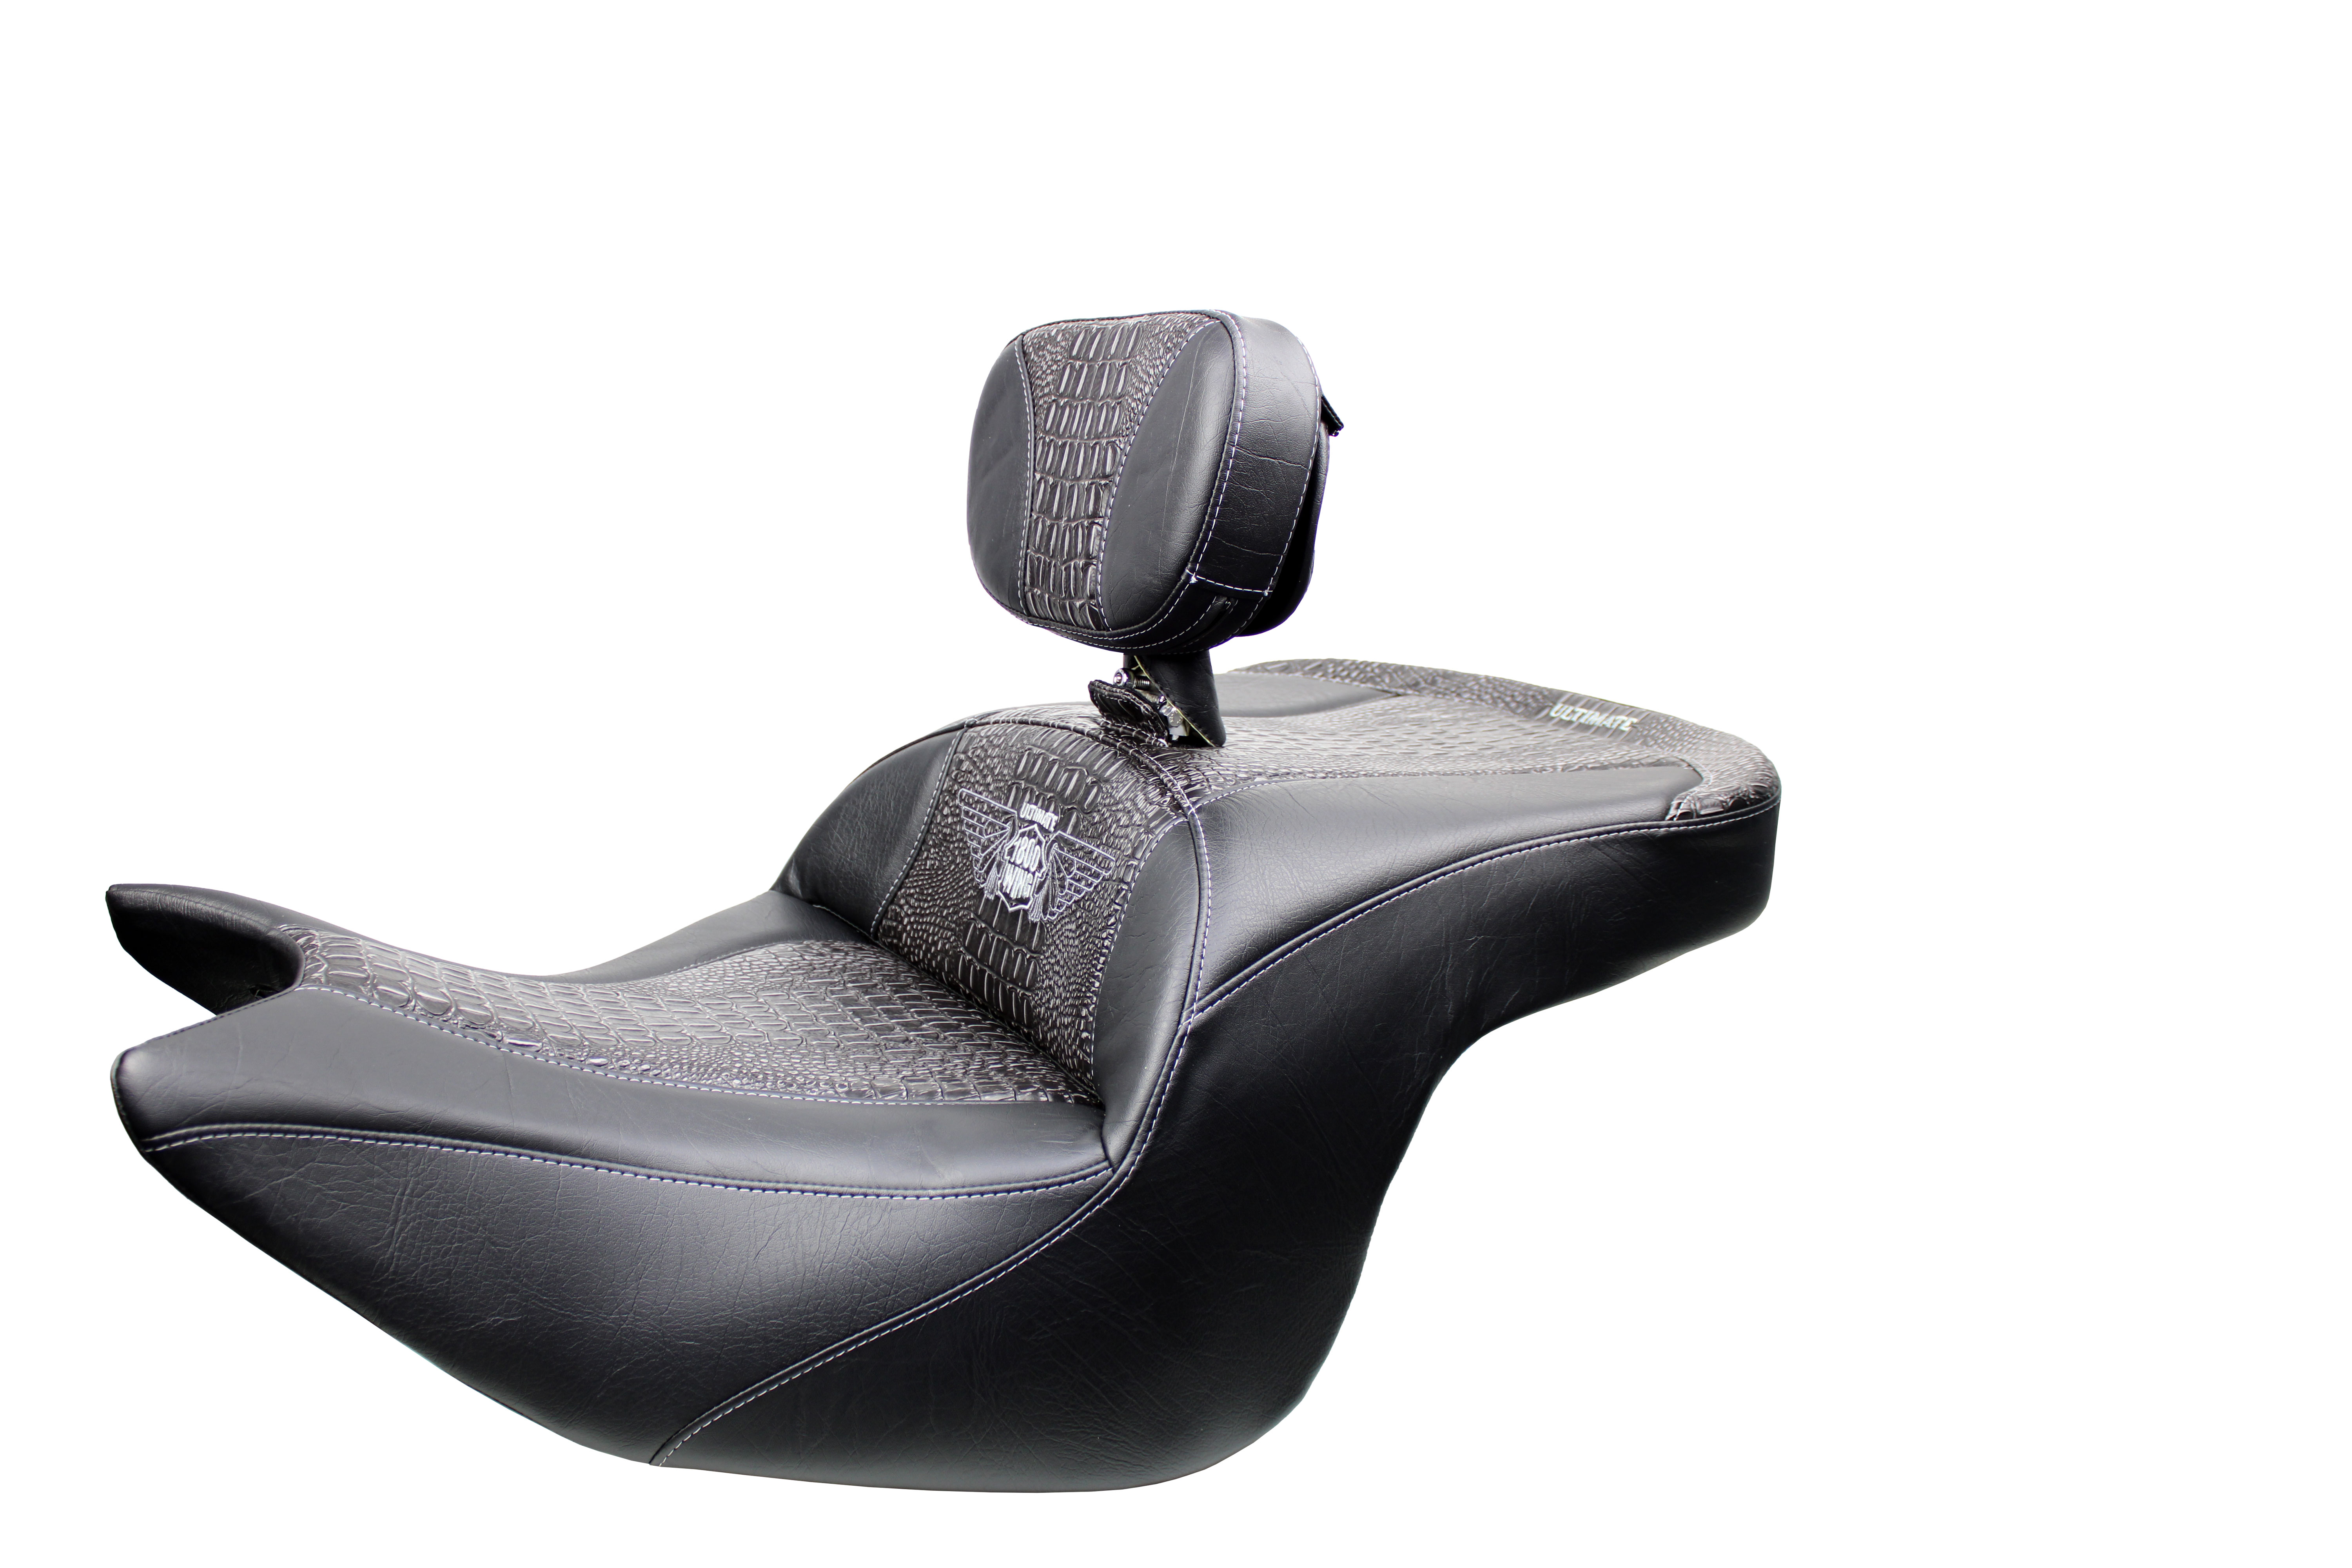 Goldwing Seat and Driver Backrest - Ebony Croc Inlay (2018 and Newer)